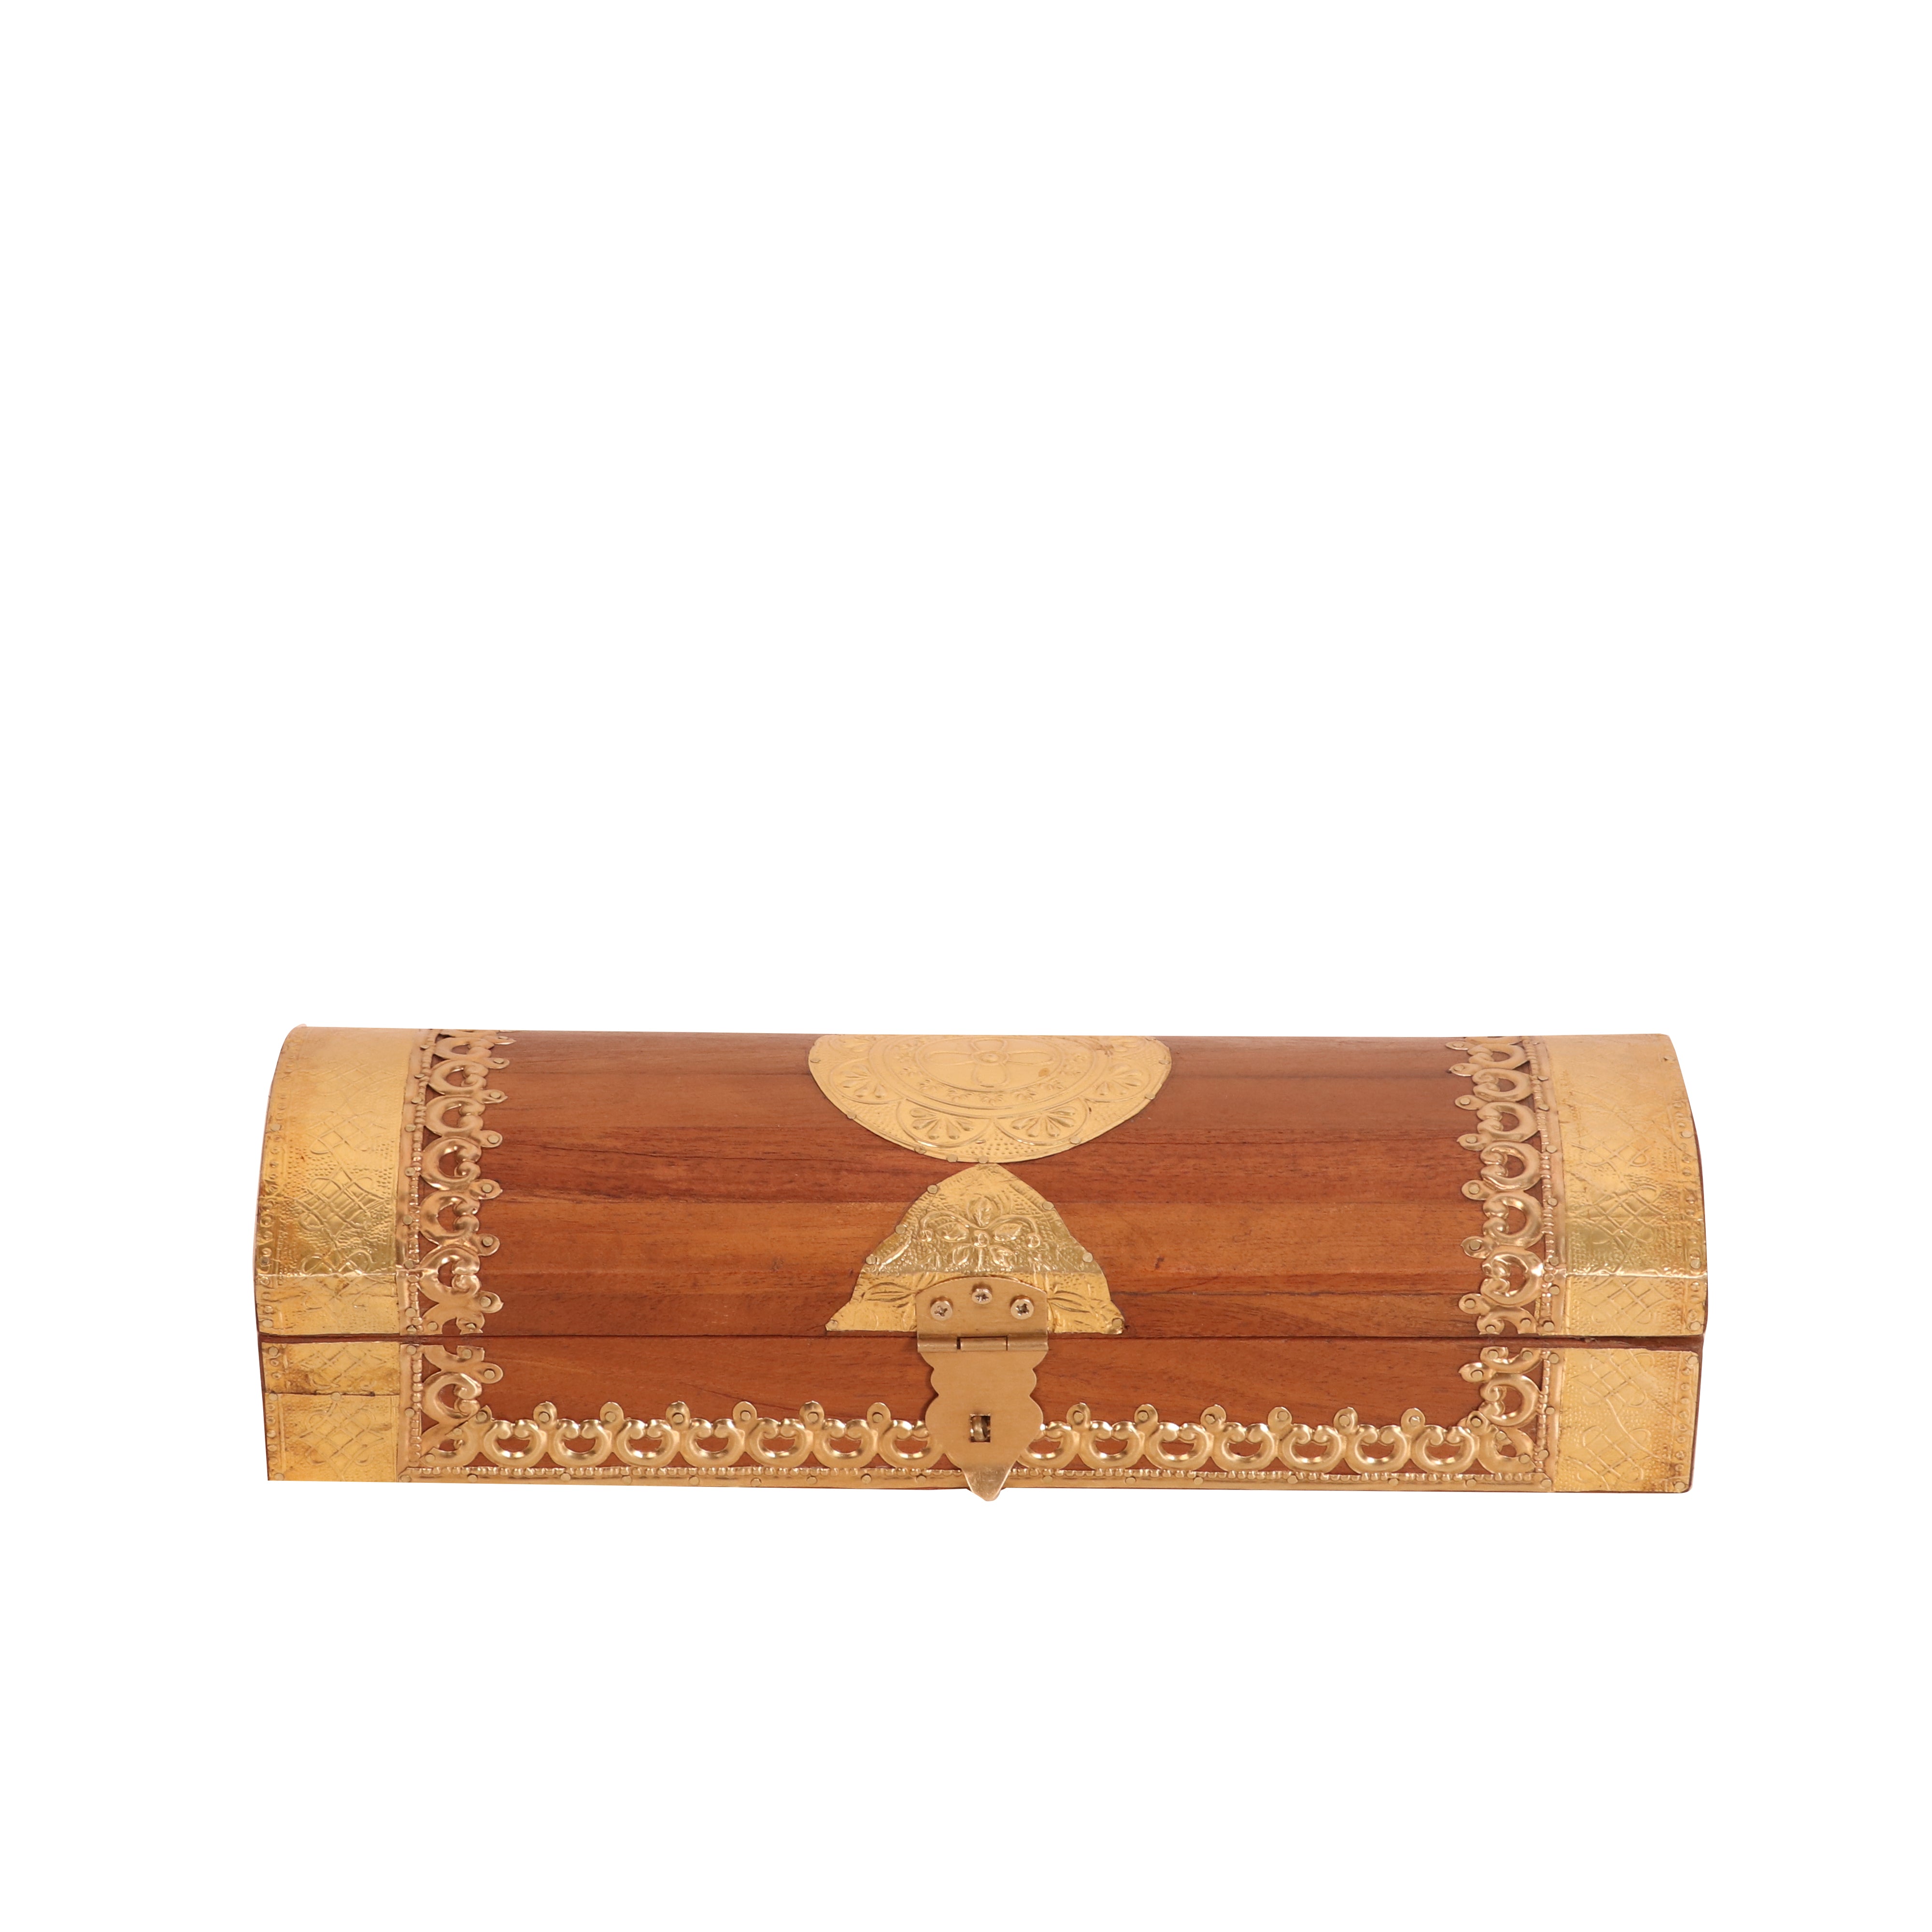 Brass fitted royal Latch Pen Pencil Case Wooden Box